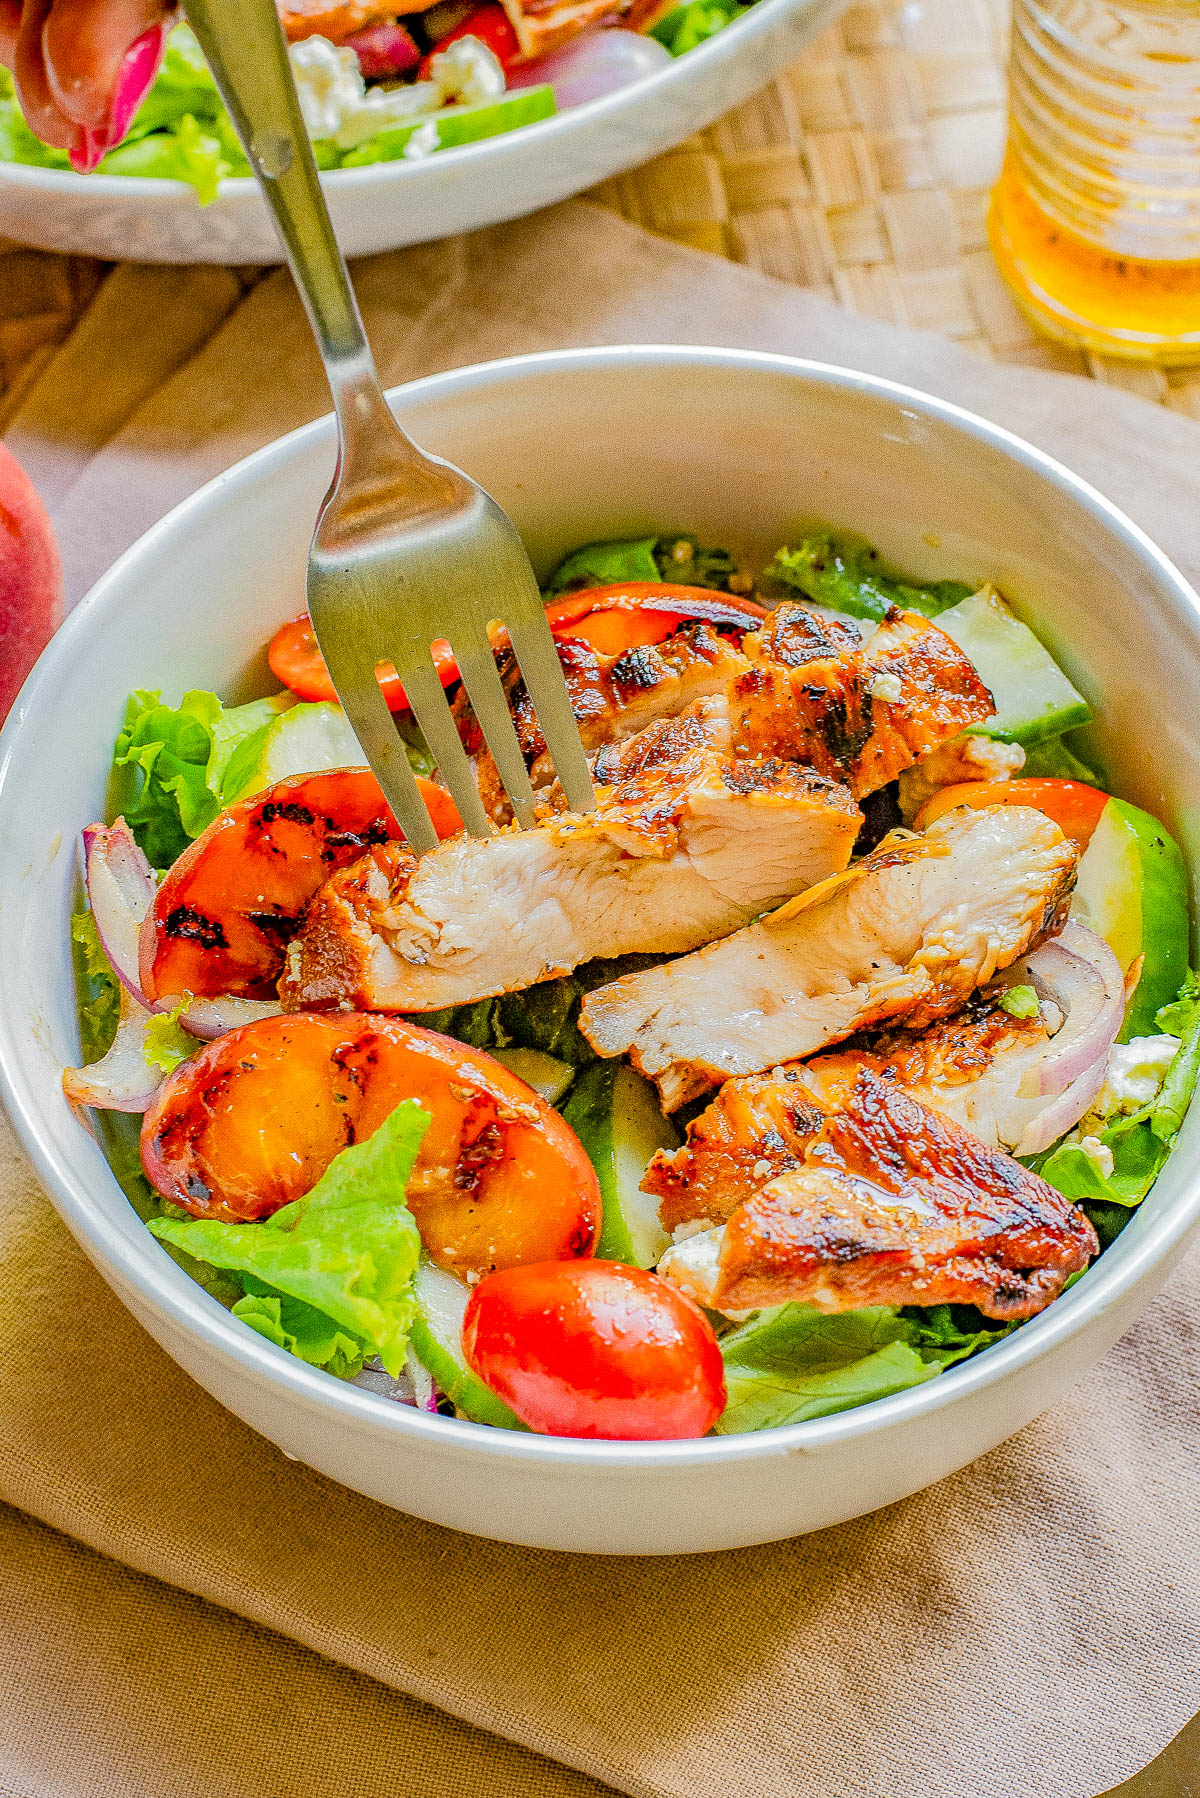 A bowl of salad with grilled chicken slices, cherry tomatoes, avocado pieces, and red onion, with a fork placed in the middle.